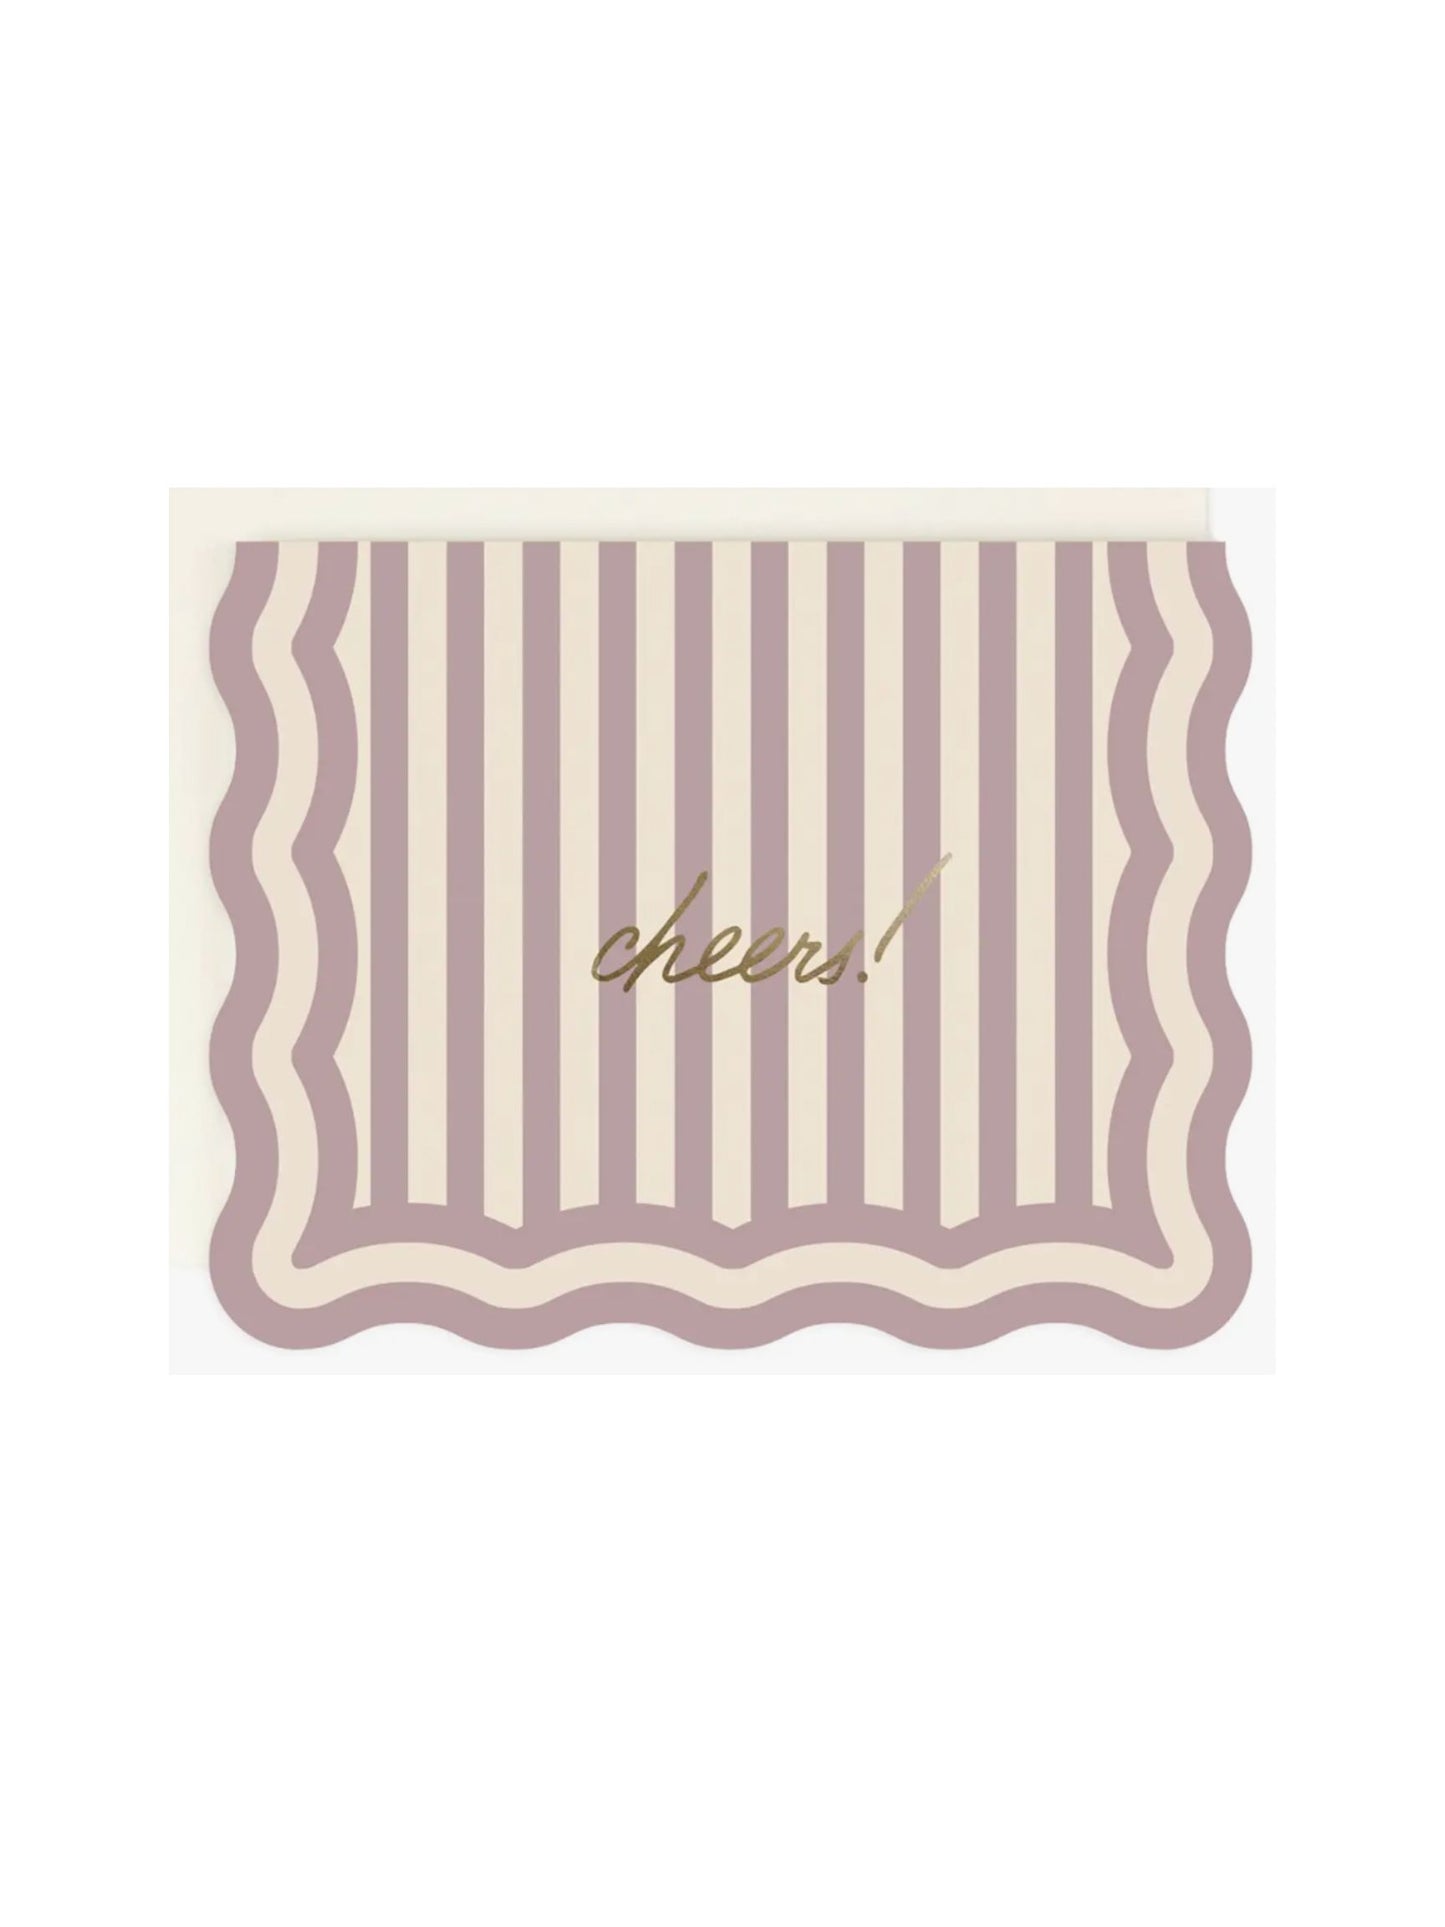 Cheers! Striped Card